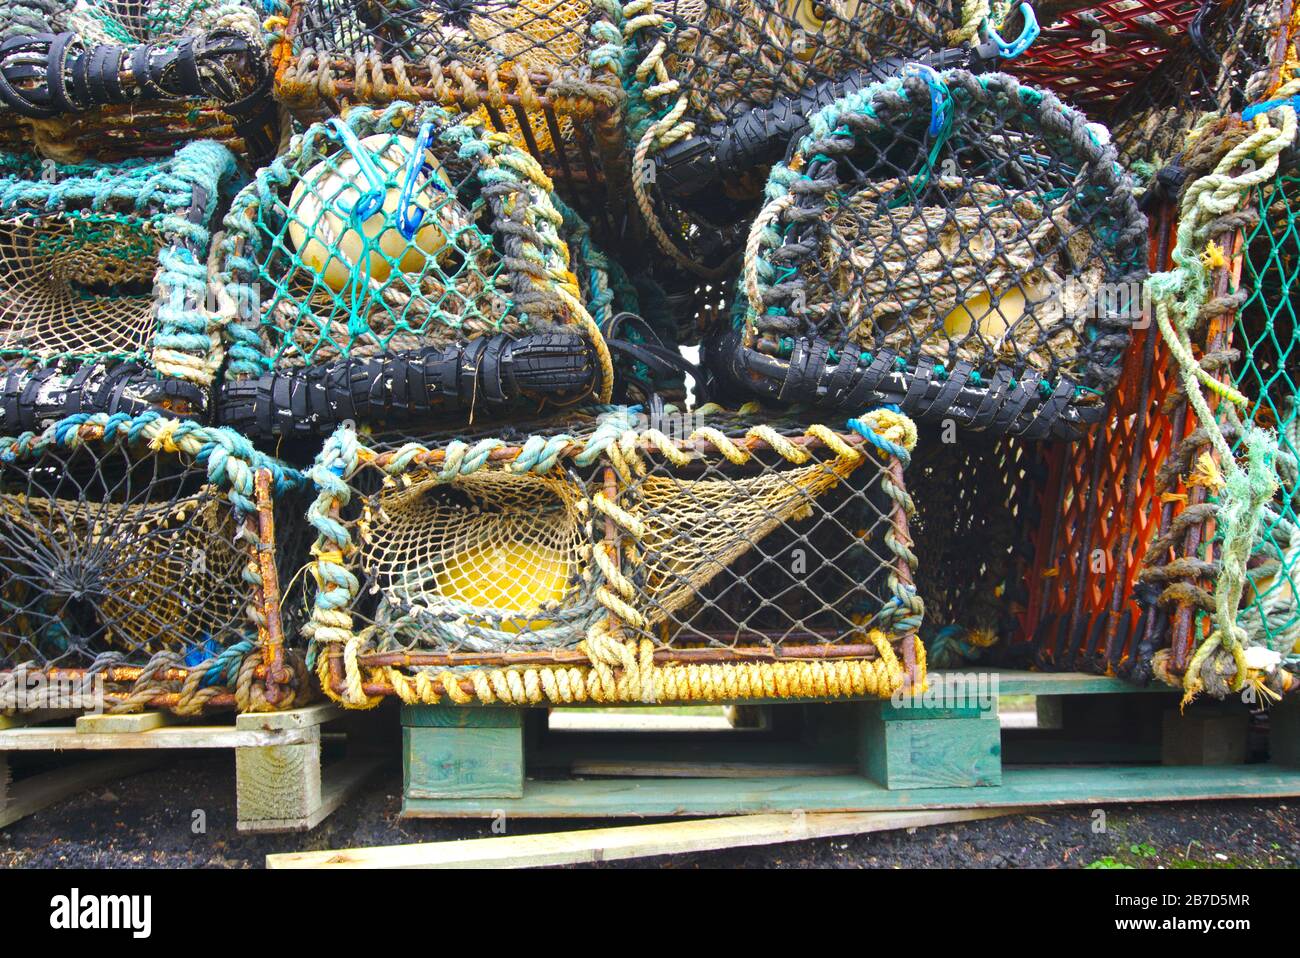 Lobster creels piled up in the harbour at St Abbs, Coldingham, Berwickshire, Scottish Borders, UK Stock Photo